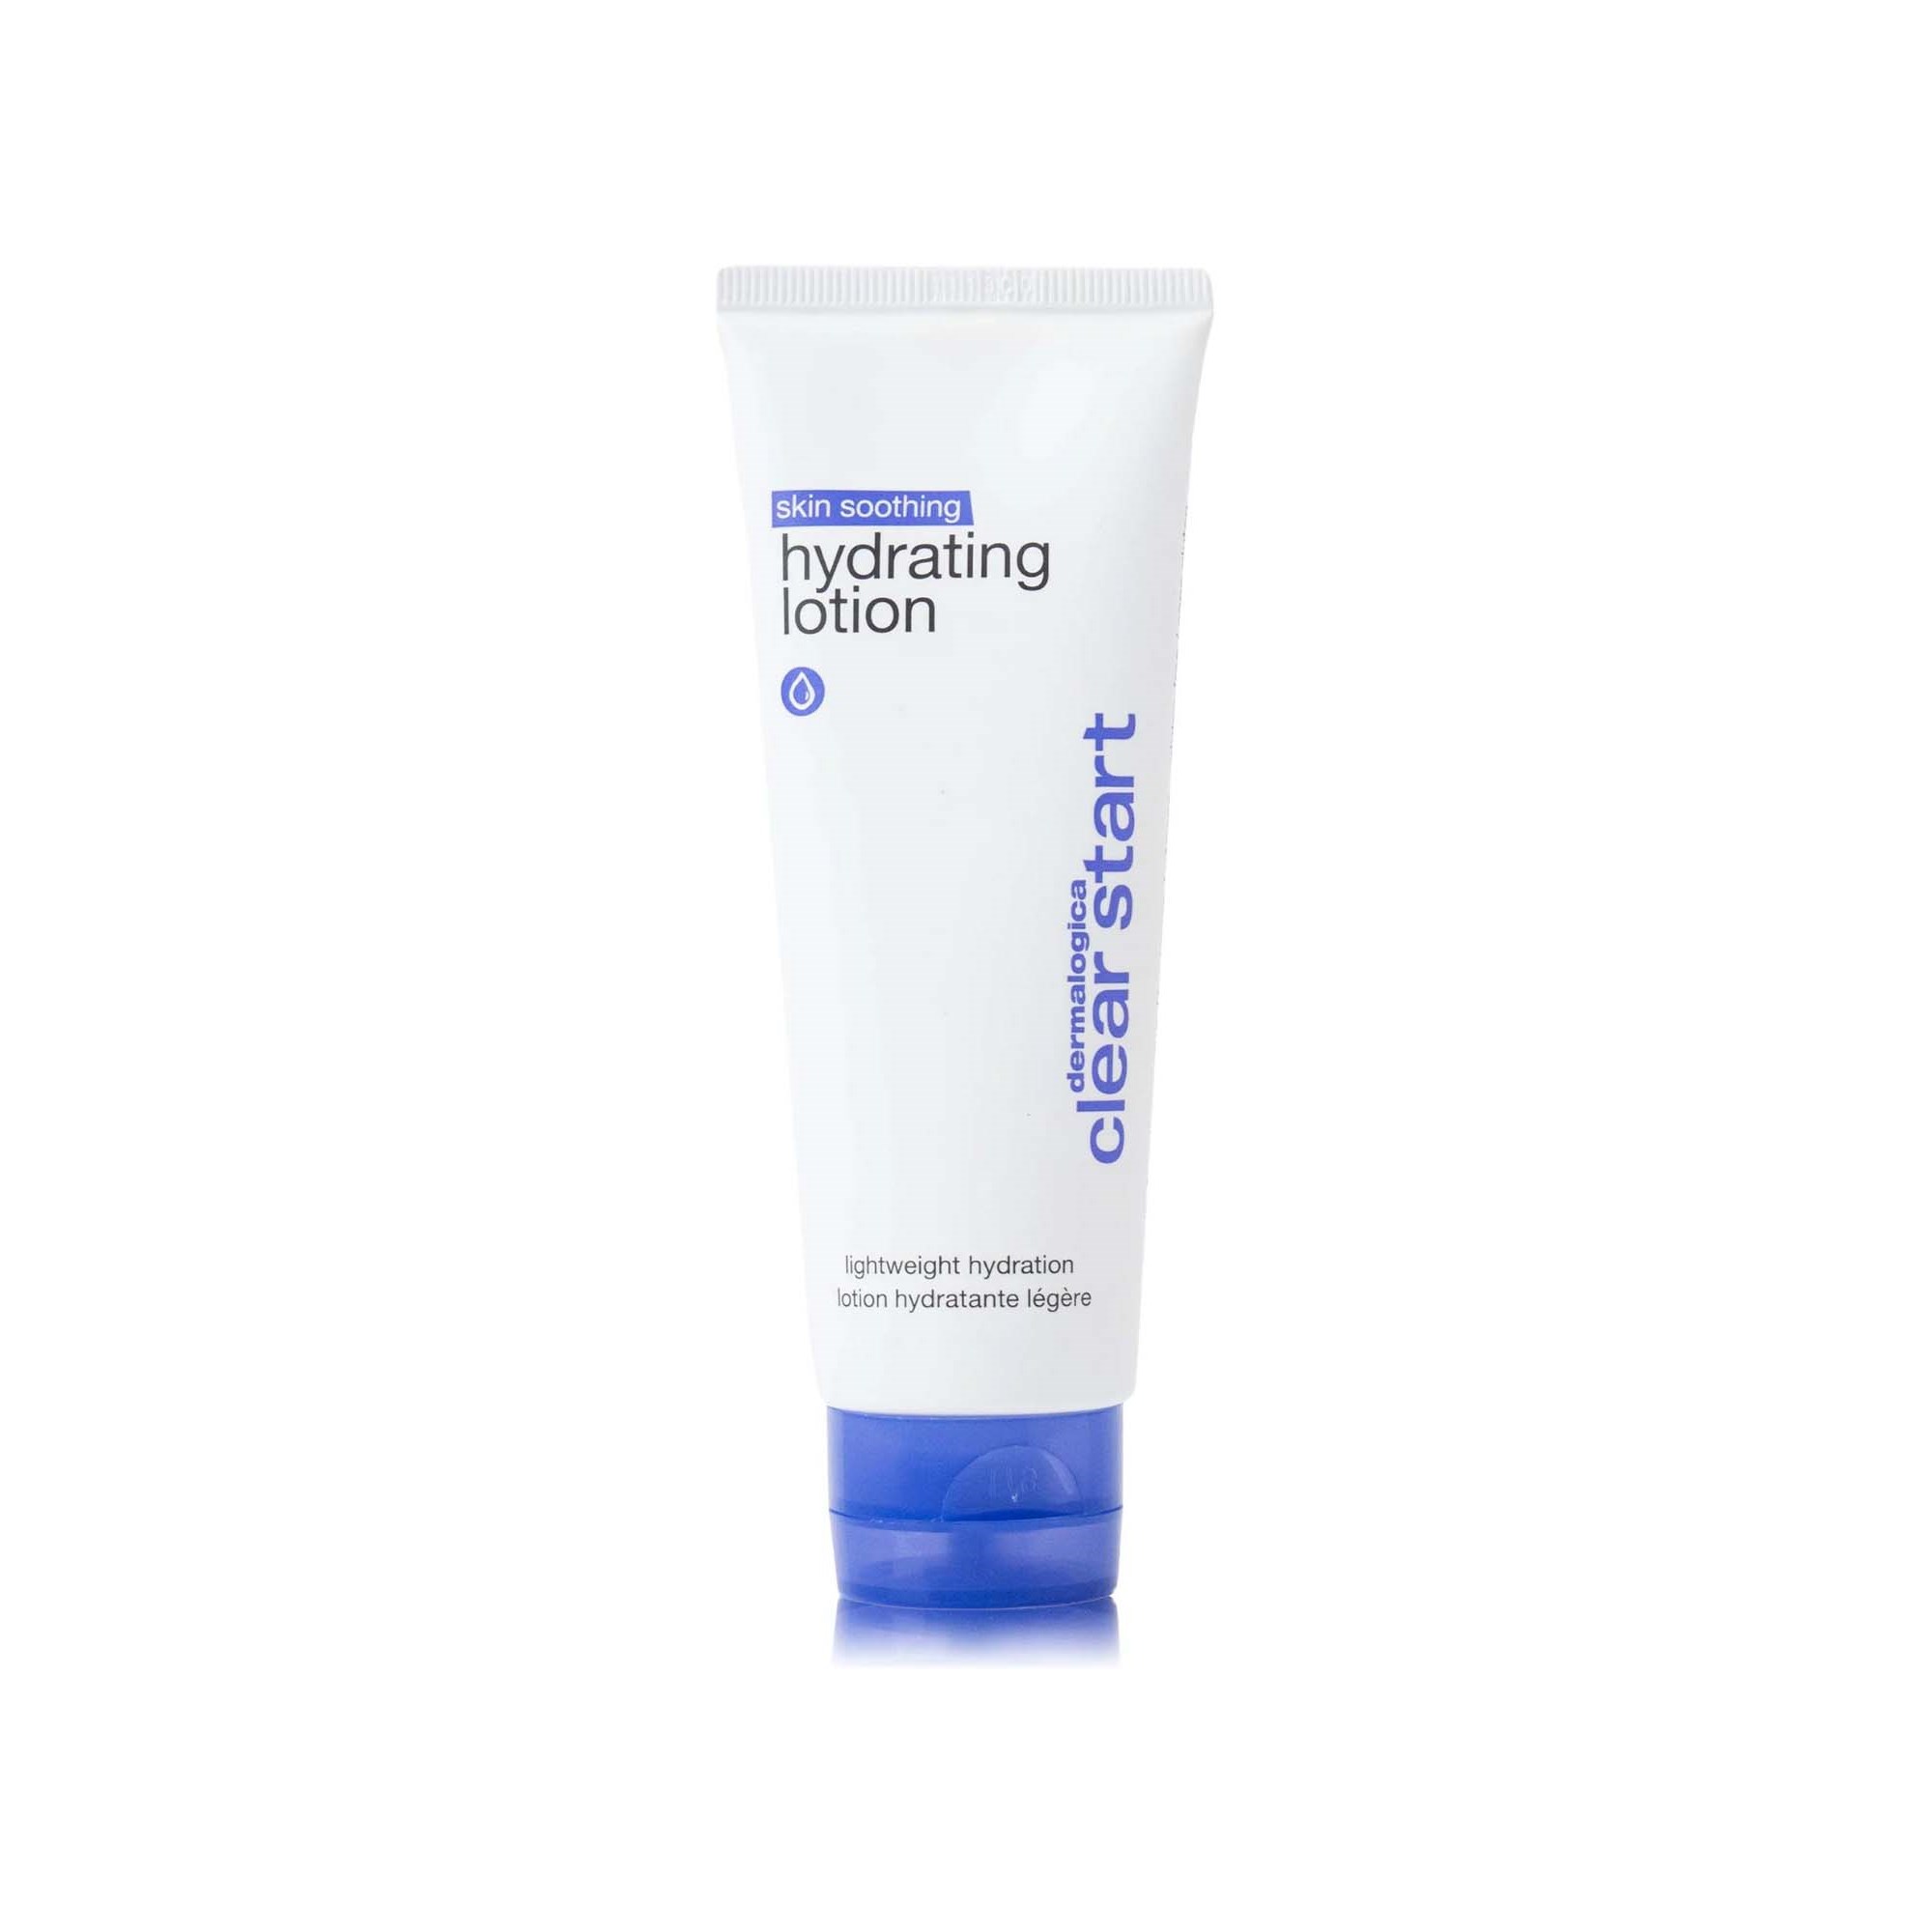 Dermalogica Clear Start Skin Soothing Hydrating Lotion 59 ml